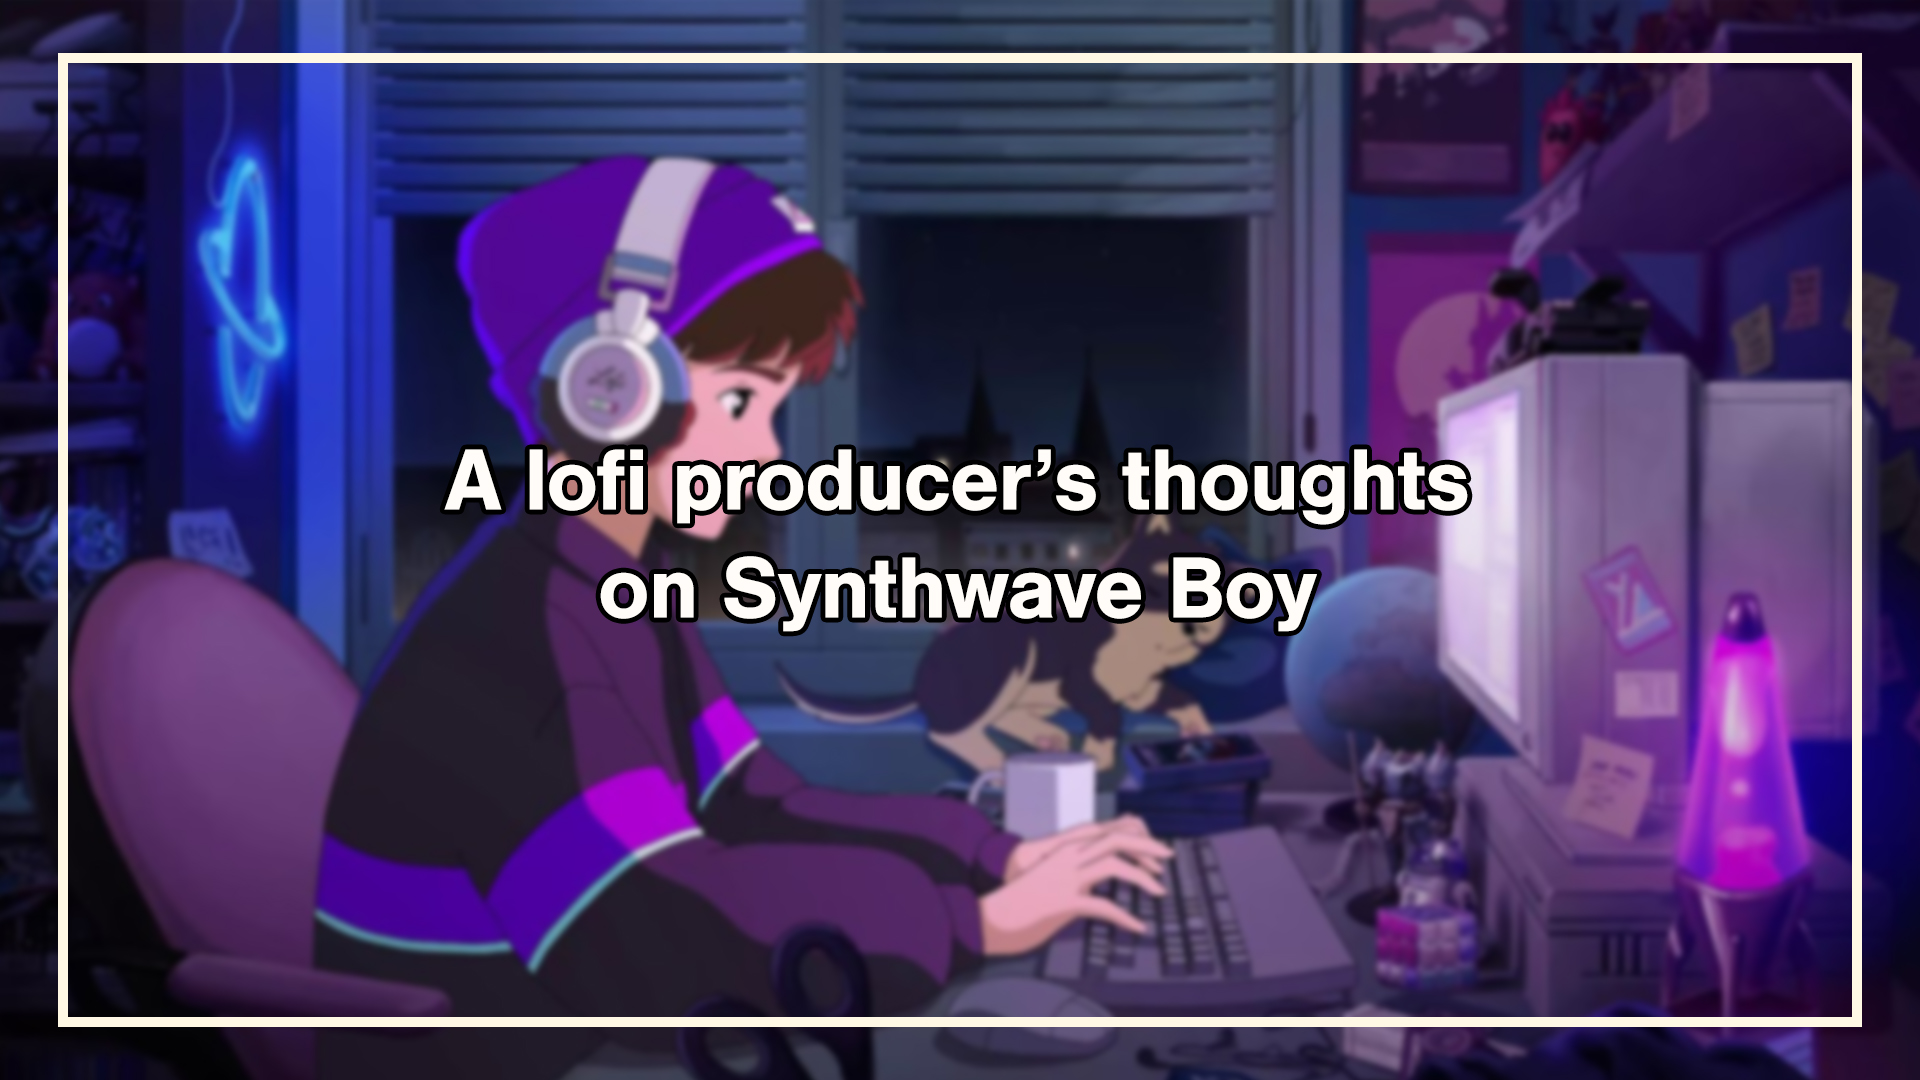 Lofi Girl's Synthwave Boy, a producer's thoughts on this new announcement.